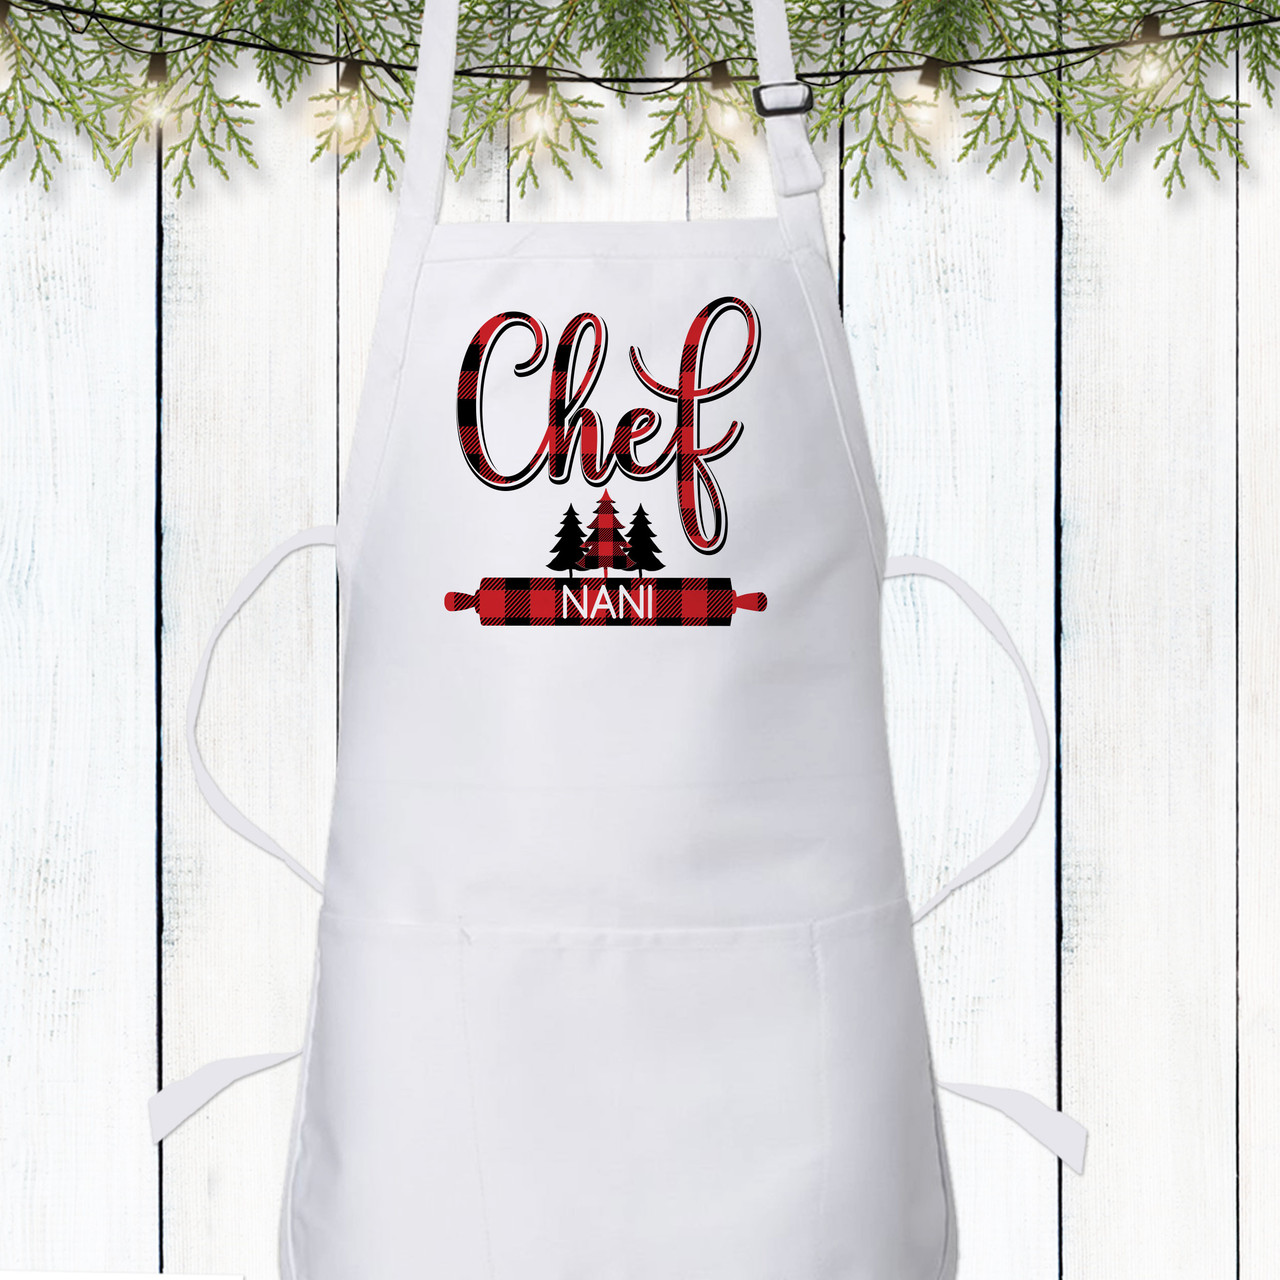 Personalized Apron for Women Custom Womens Apron Cooking 